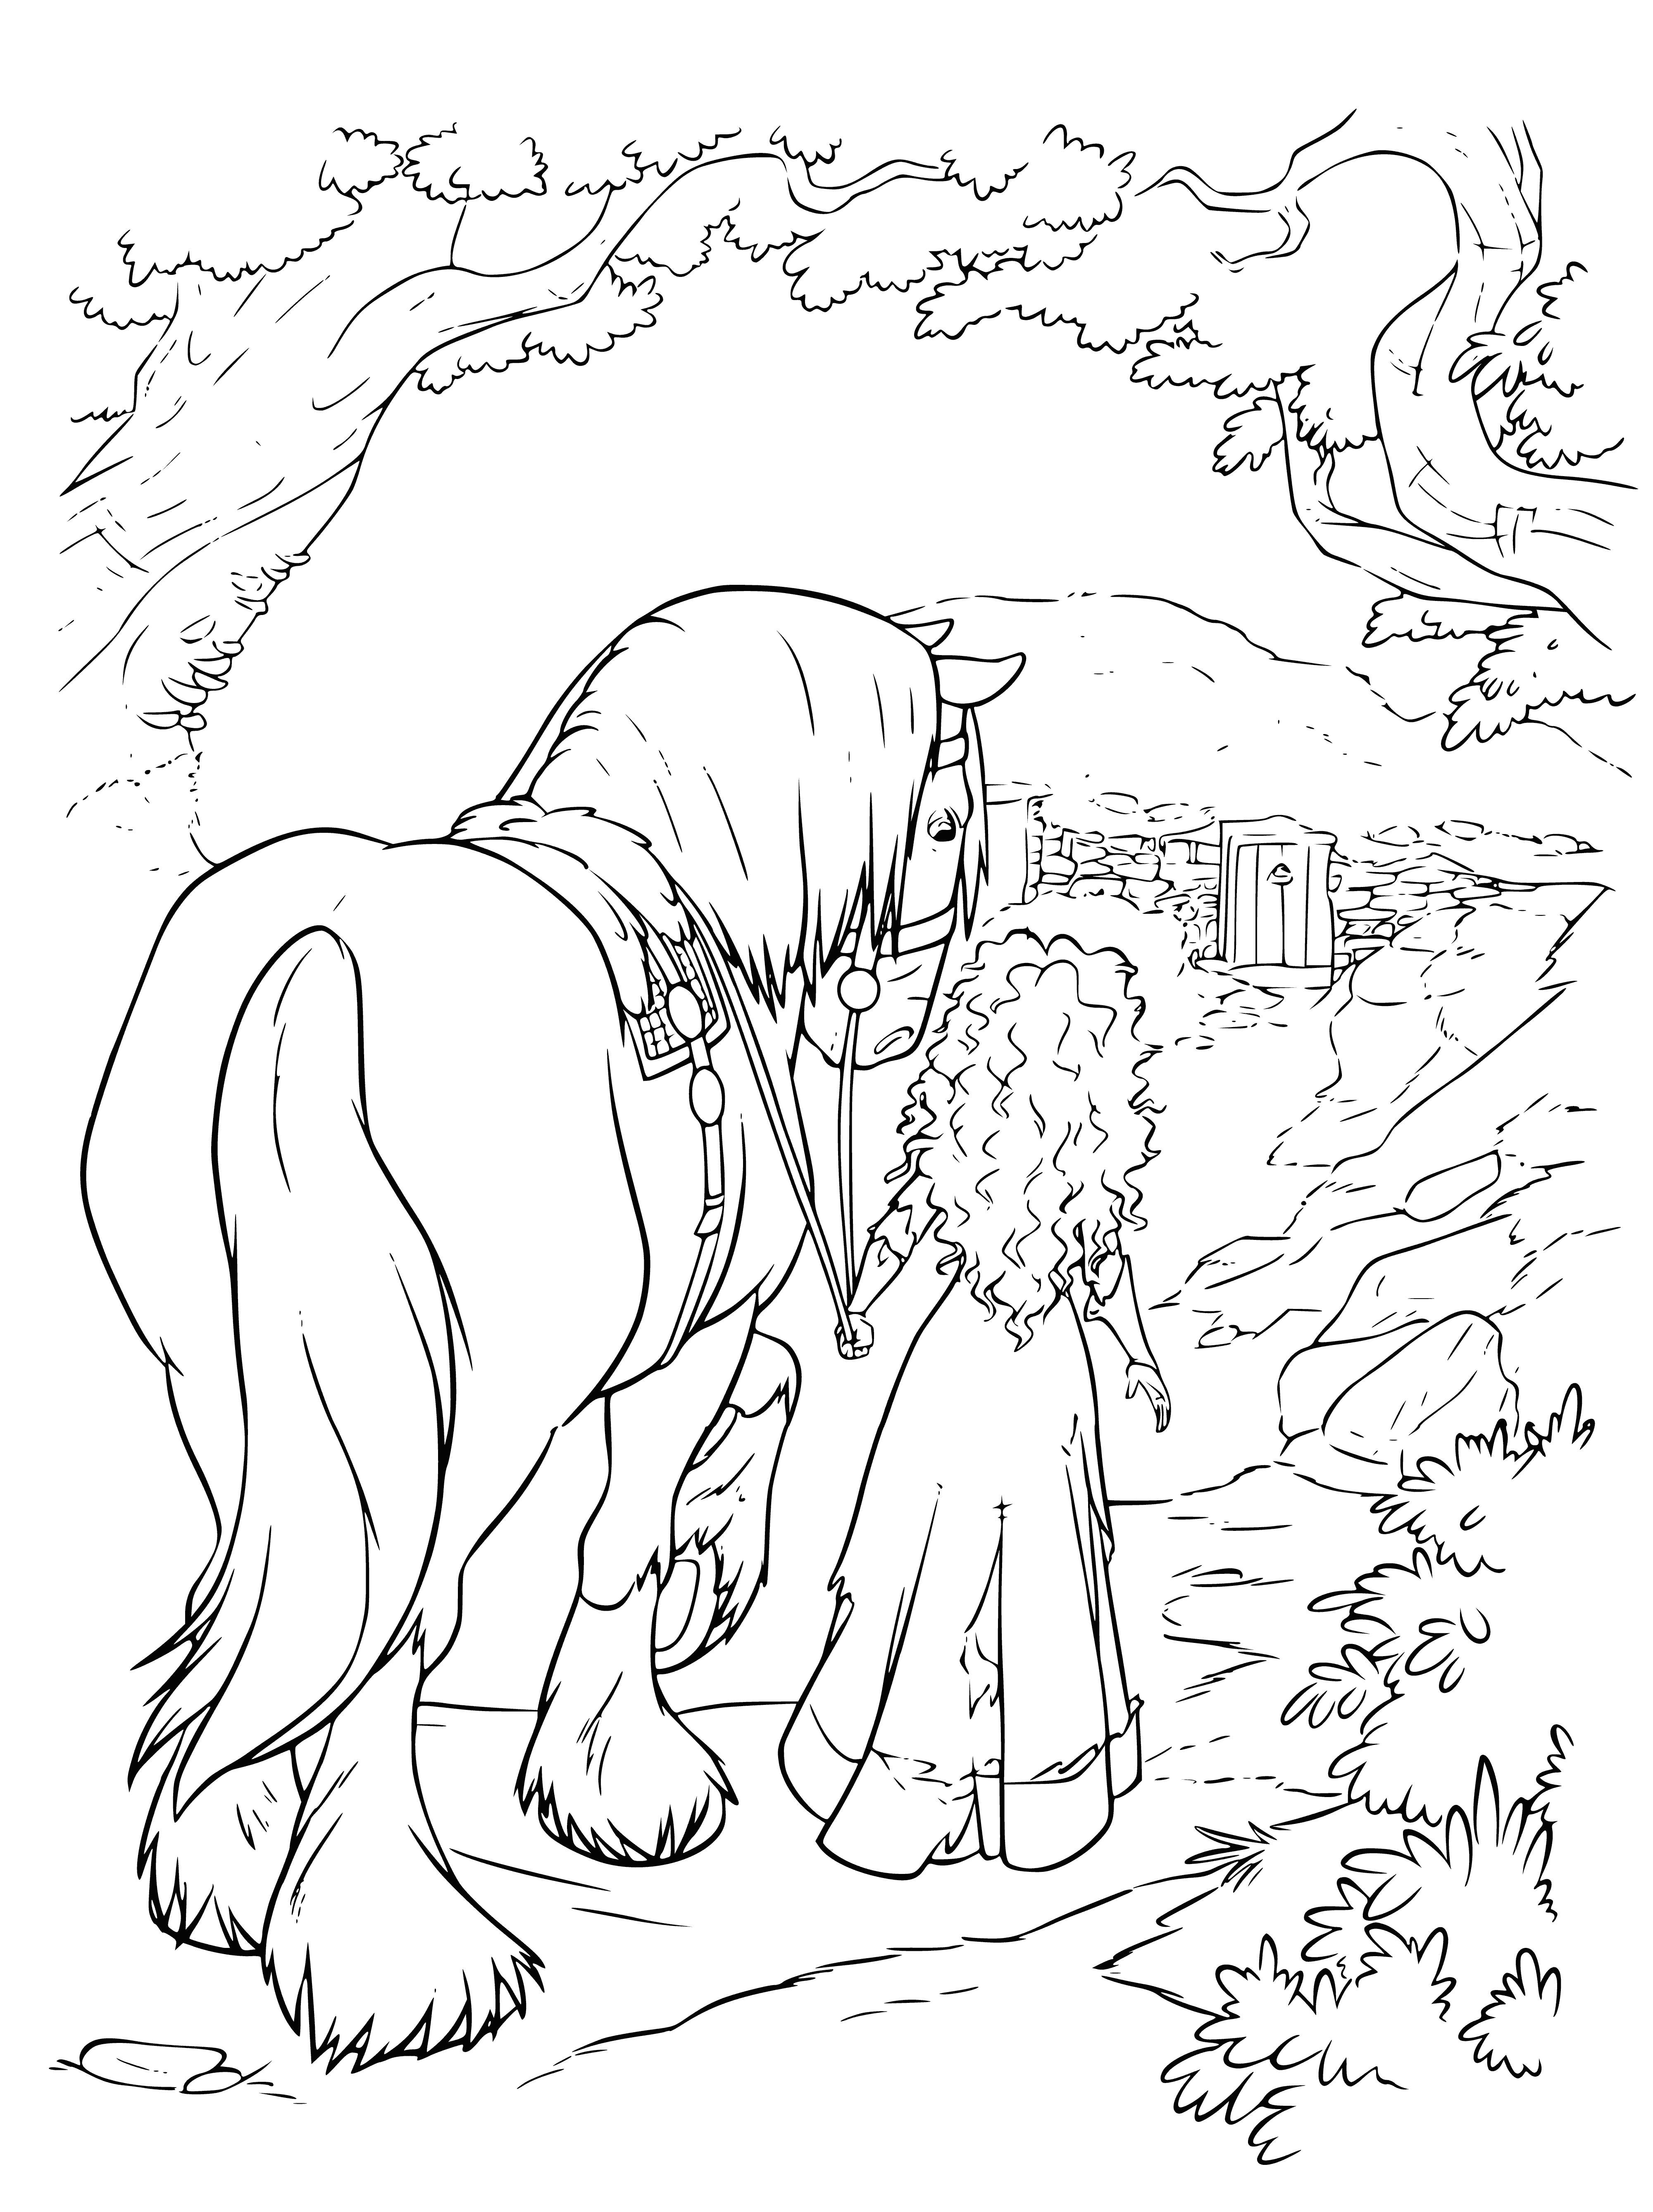 Witch's dwelling coloring page